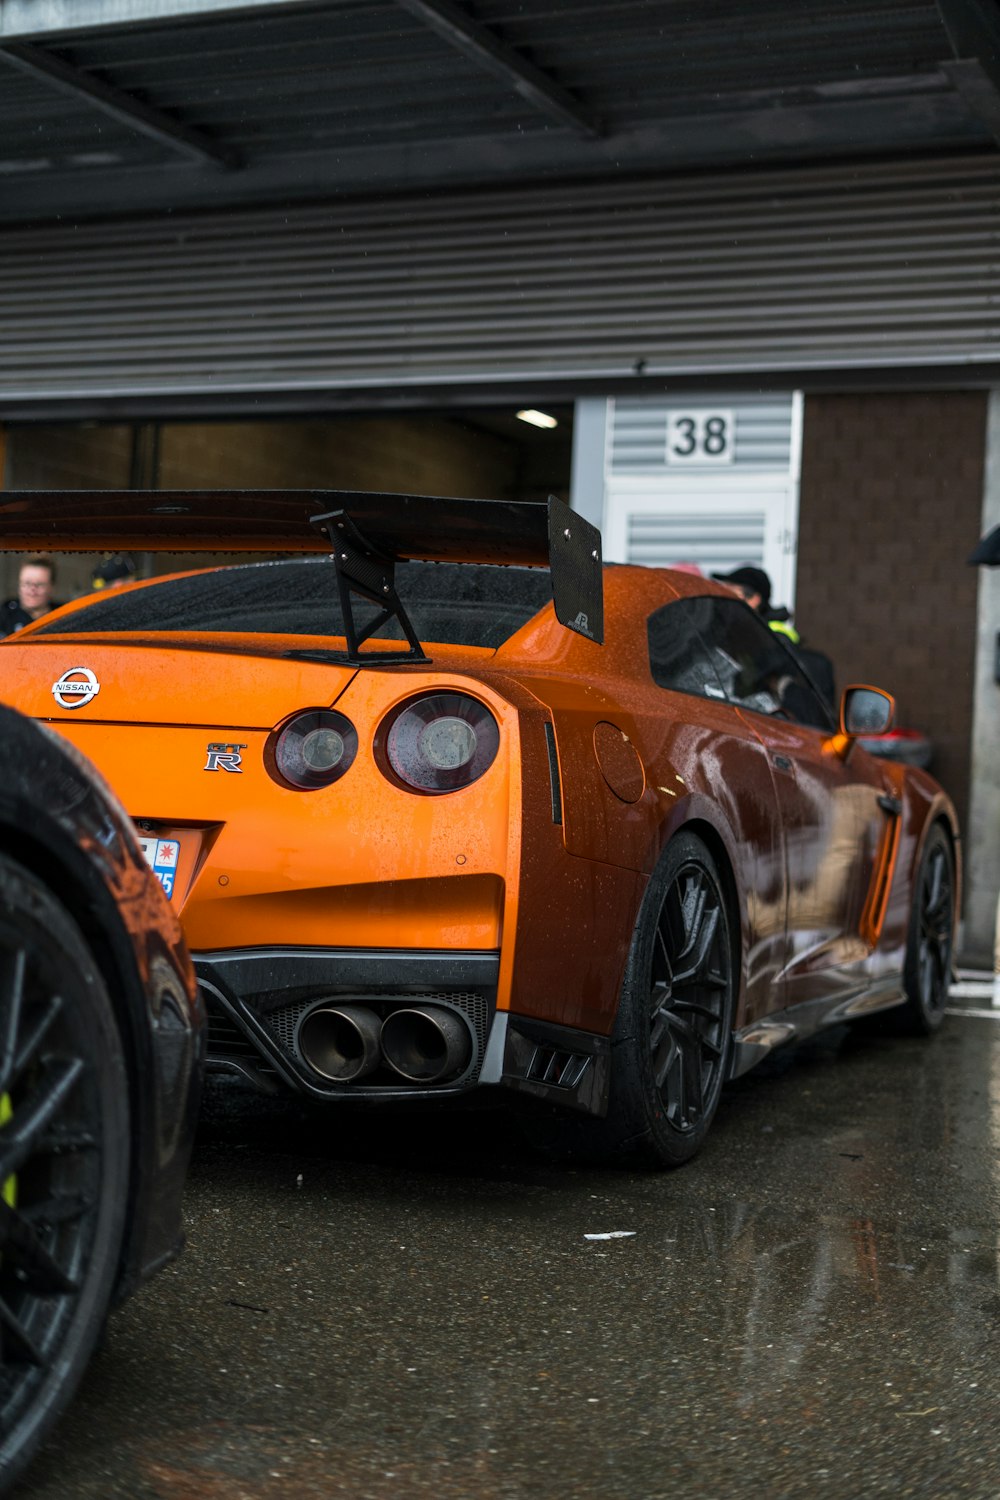 an orange sports car parked in front of a building